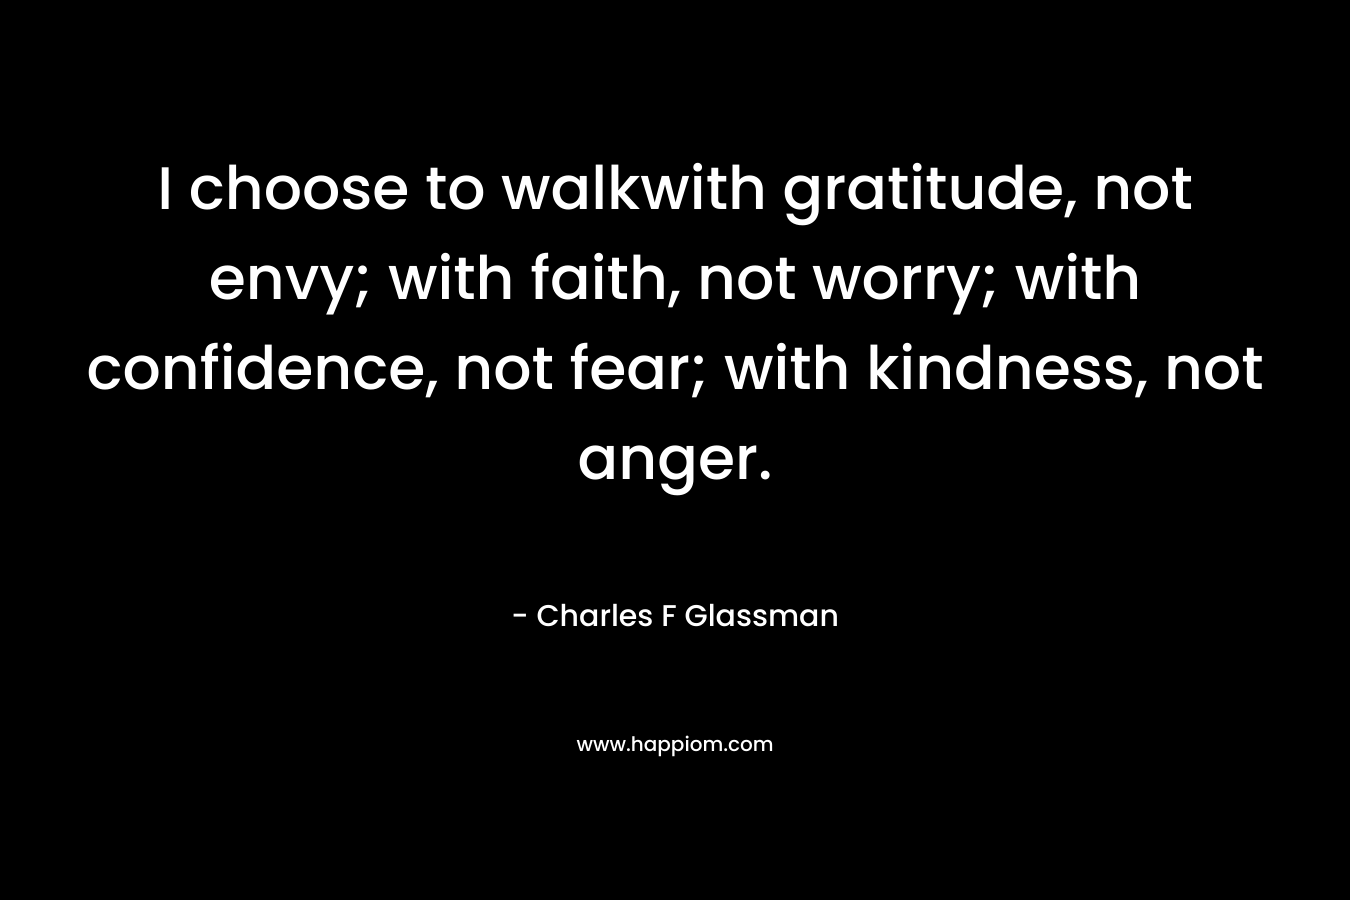 I choose to walkwith gratitude, not envy; with faith, not worry; with confidence, not fear; with kindness, not anger. – Charles F Glassman